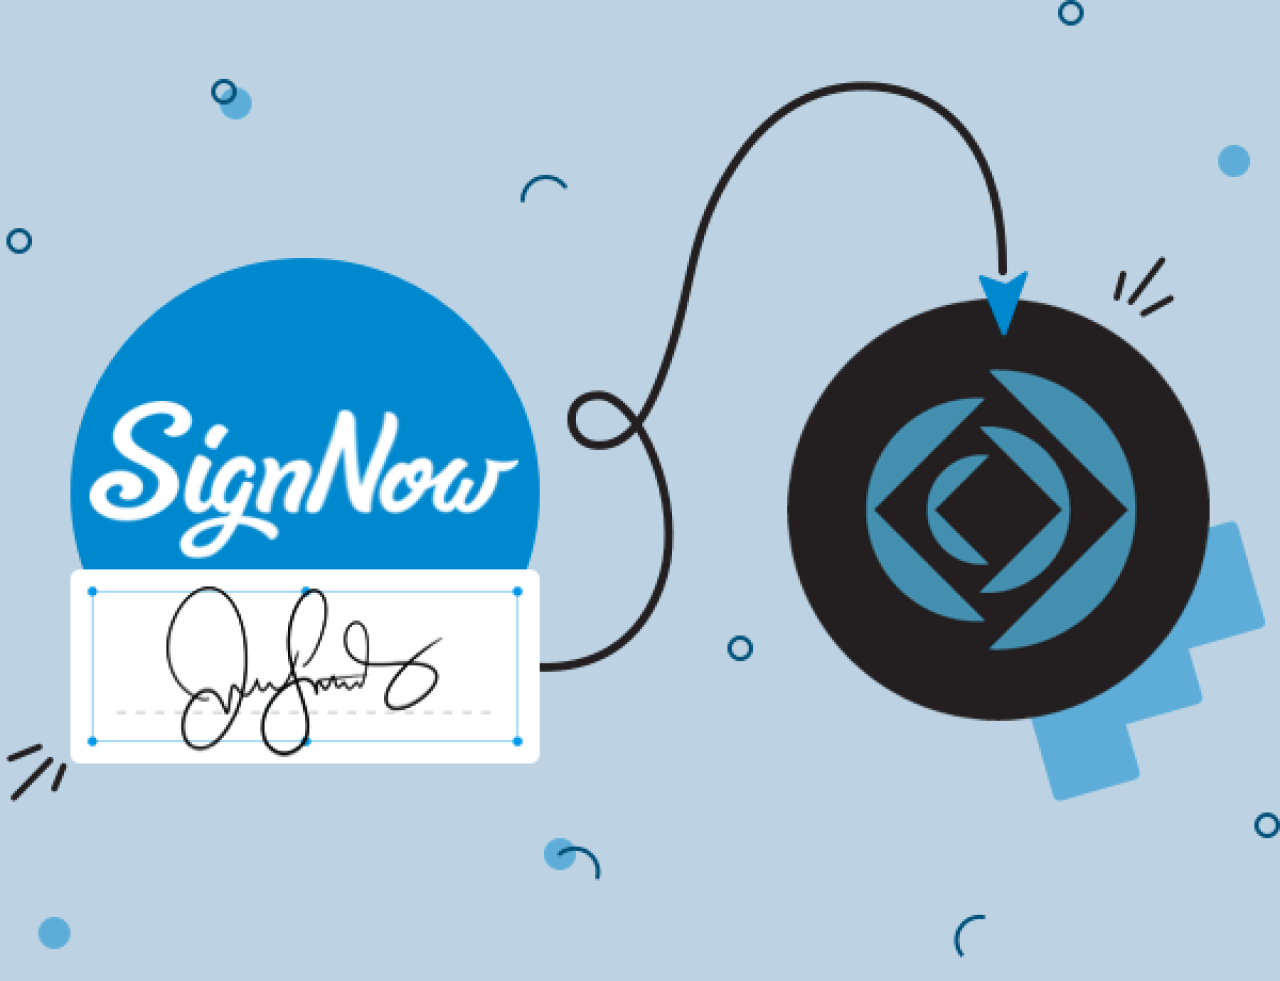 signnow and filemaker integration.